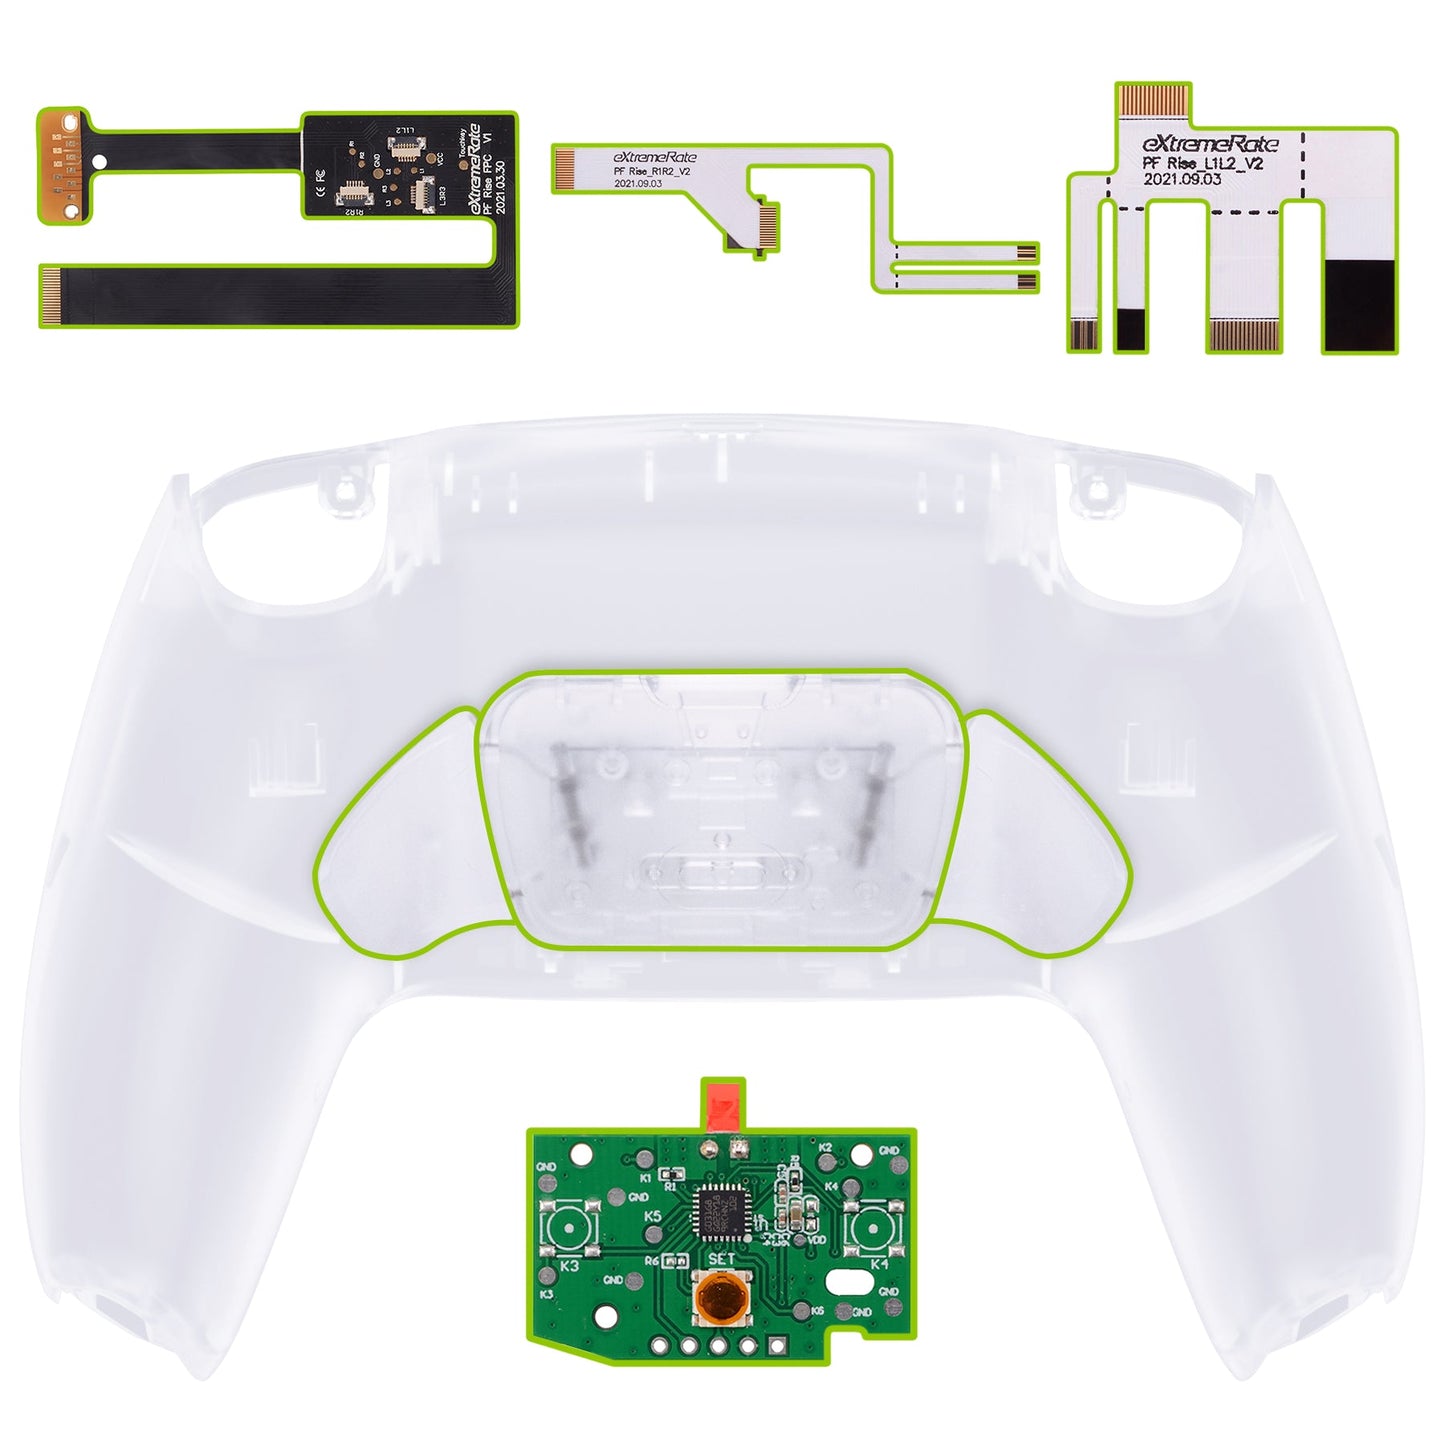 eXtremeRate Retail Clear Back Paddles Remappable Rise Remap Kit for ps5 Controller with Upgrade Board & Redesigned Back Shell & Back Buttons Attachment for ps5 Controller BDM-010 & BDM-020 - XPFM5001G2